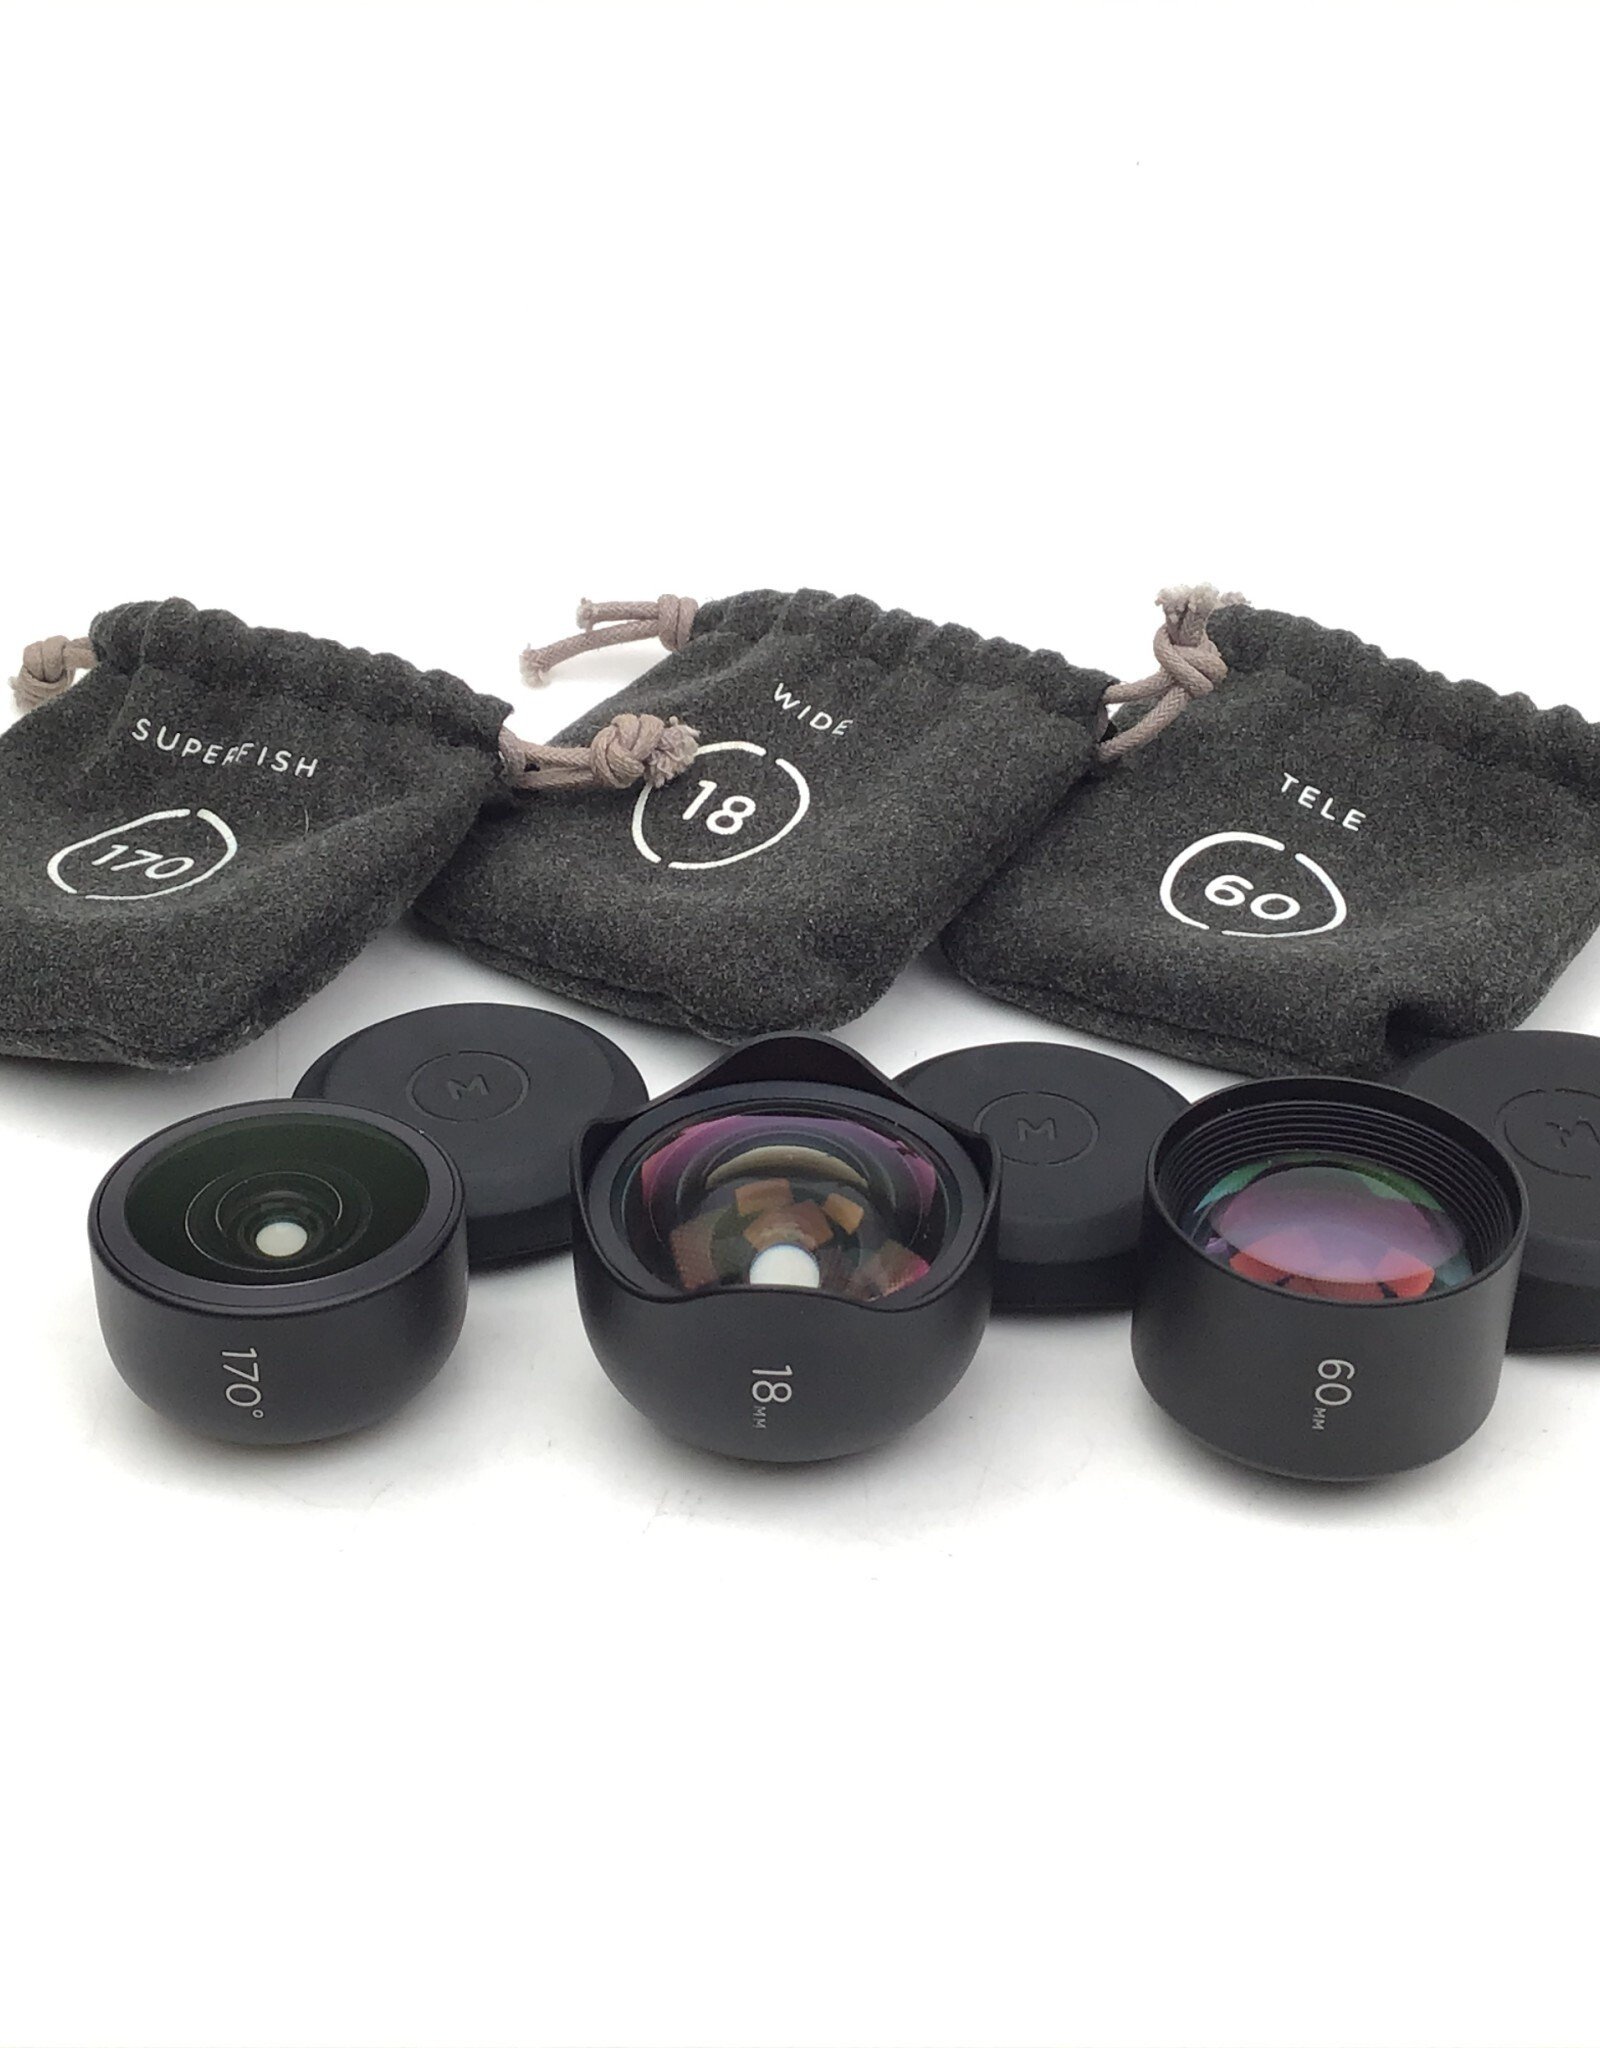 Moment Lens Set for Phone 60mm, Superfish 170, 18mm Wide Used Good ...